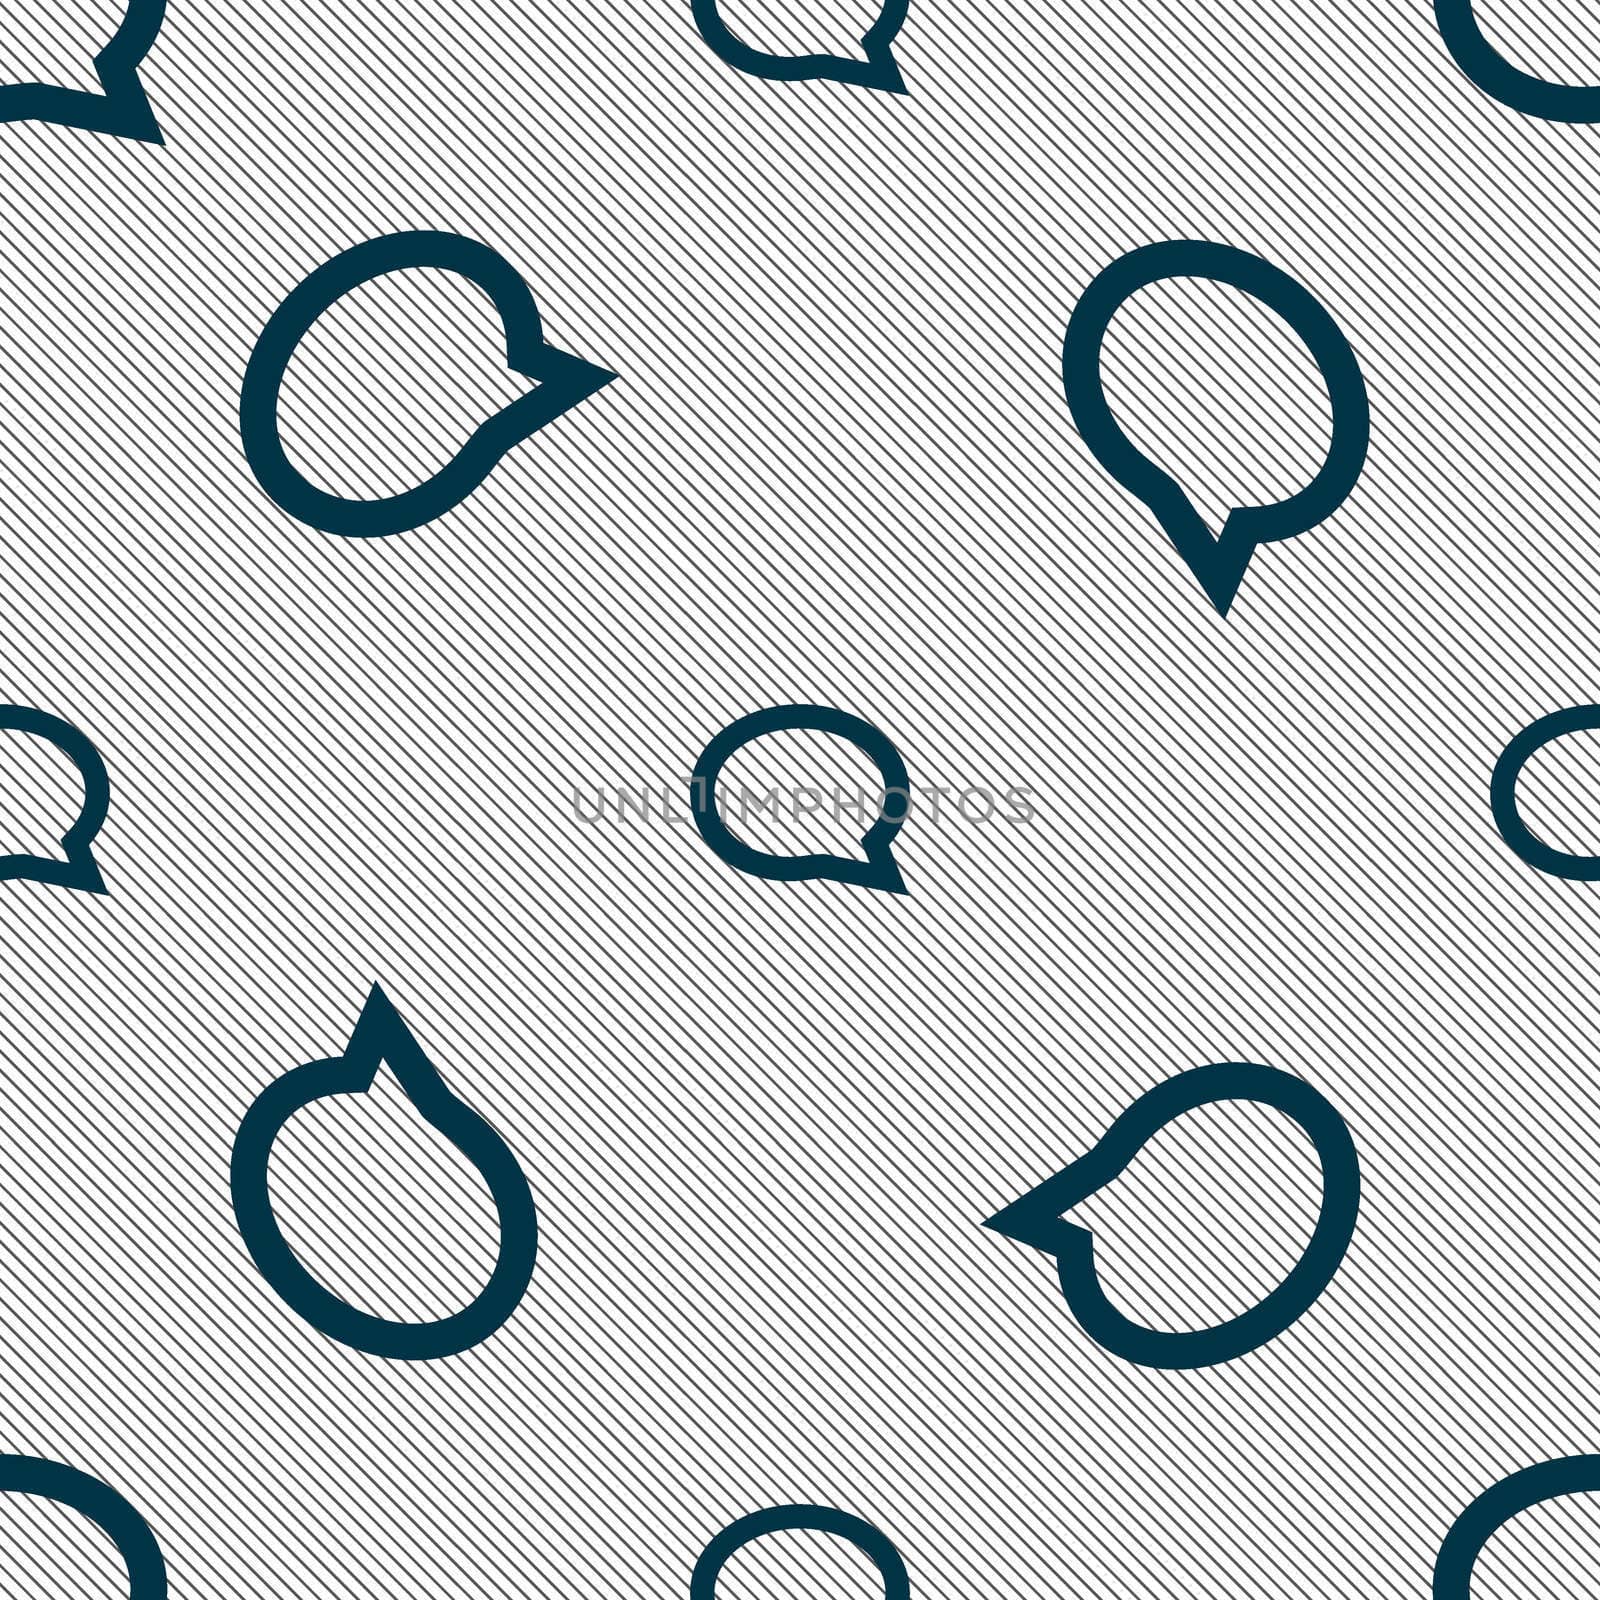 Speech bubble icons. Think cloud symbols. Seamless pattern with geometric texture. illustration